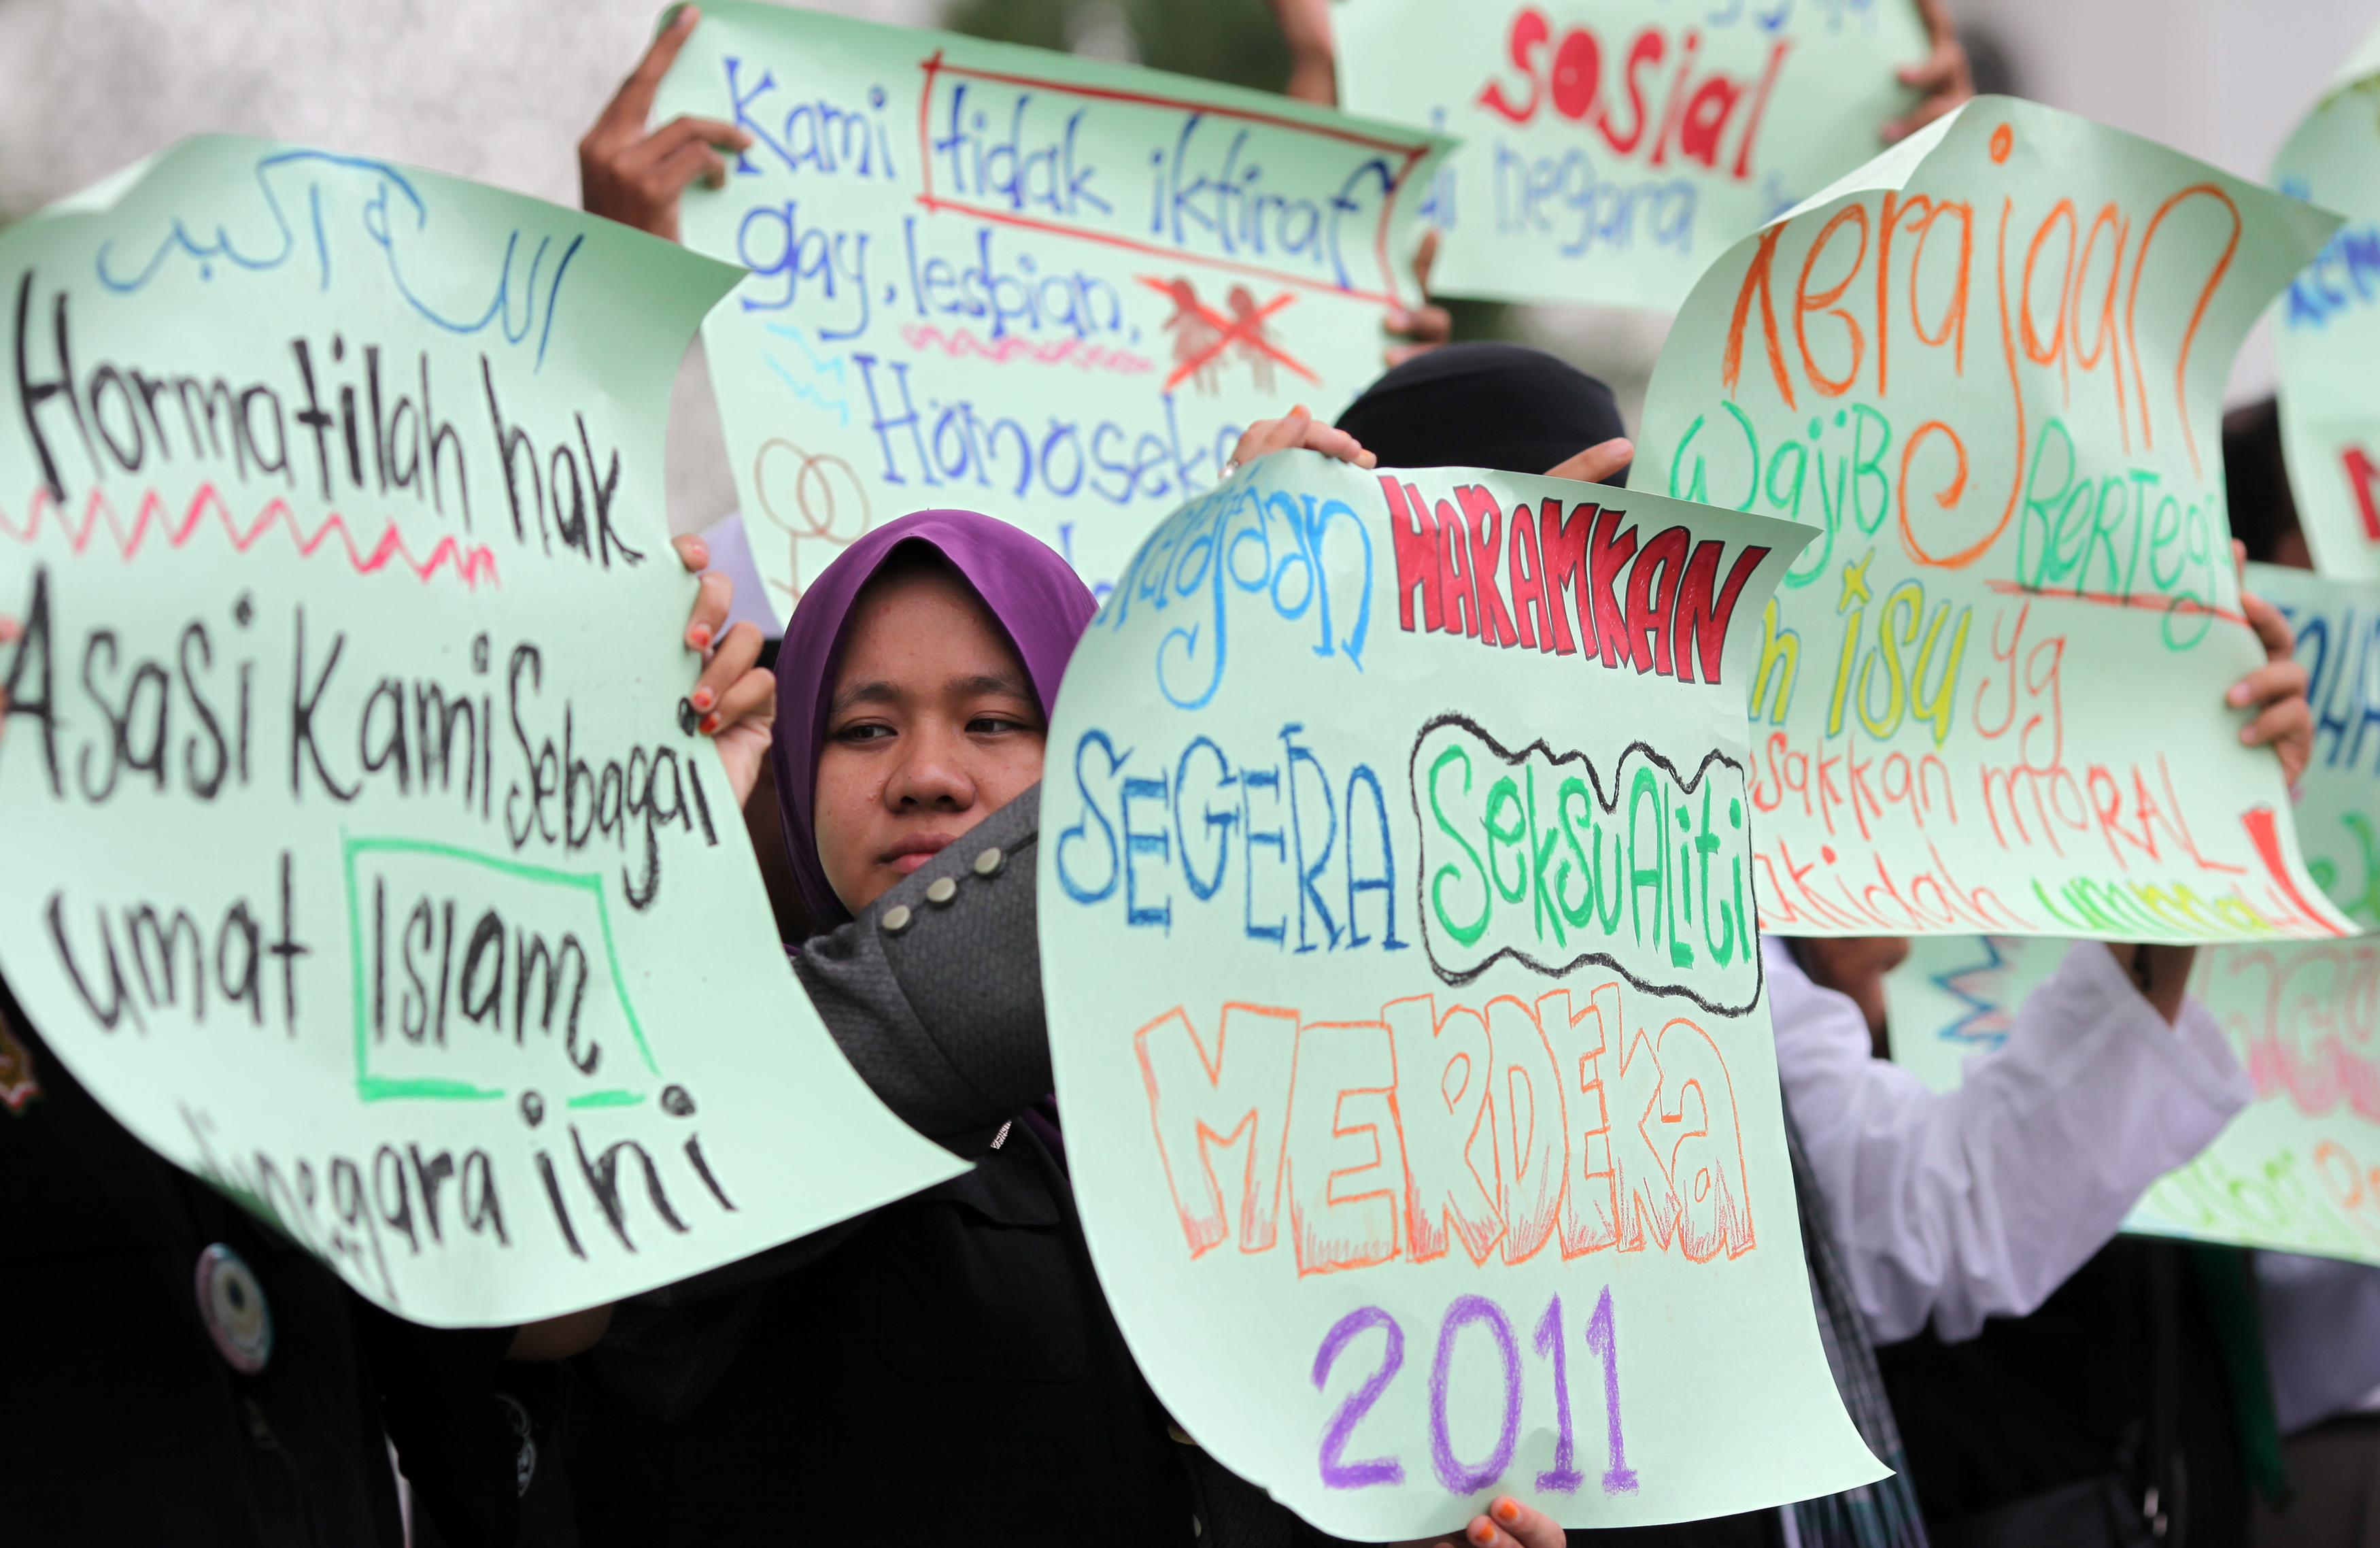 Protesters raise placards during a protest outside a mosque in Shah Alam, near Kuala Lumpur, on Nov. 4, 2011. The demonstration was to urge the government to give recognition to the lesbian, gay, bisexual and transgender community (AFP/Getty Images)